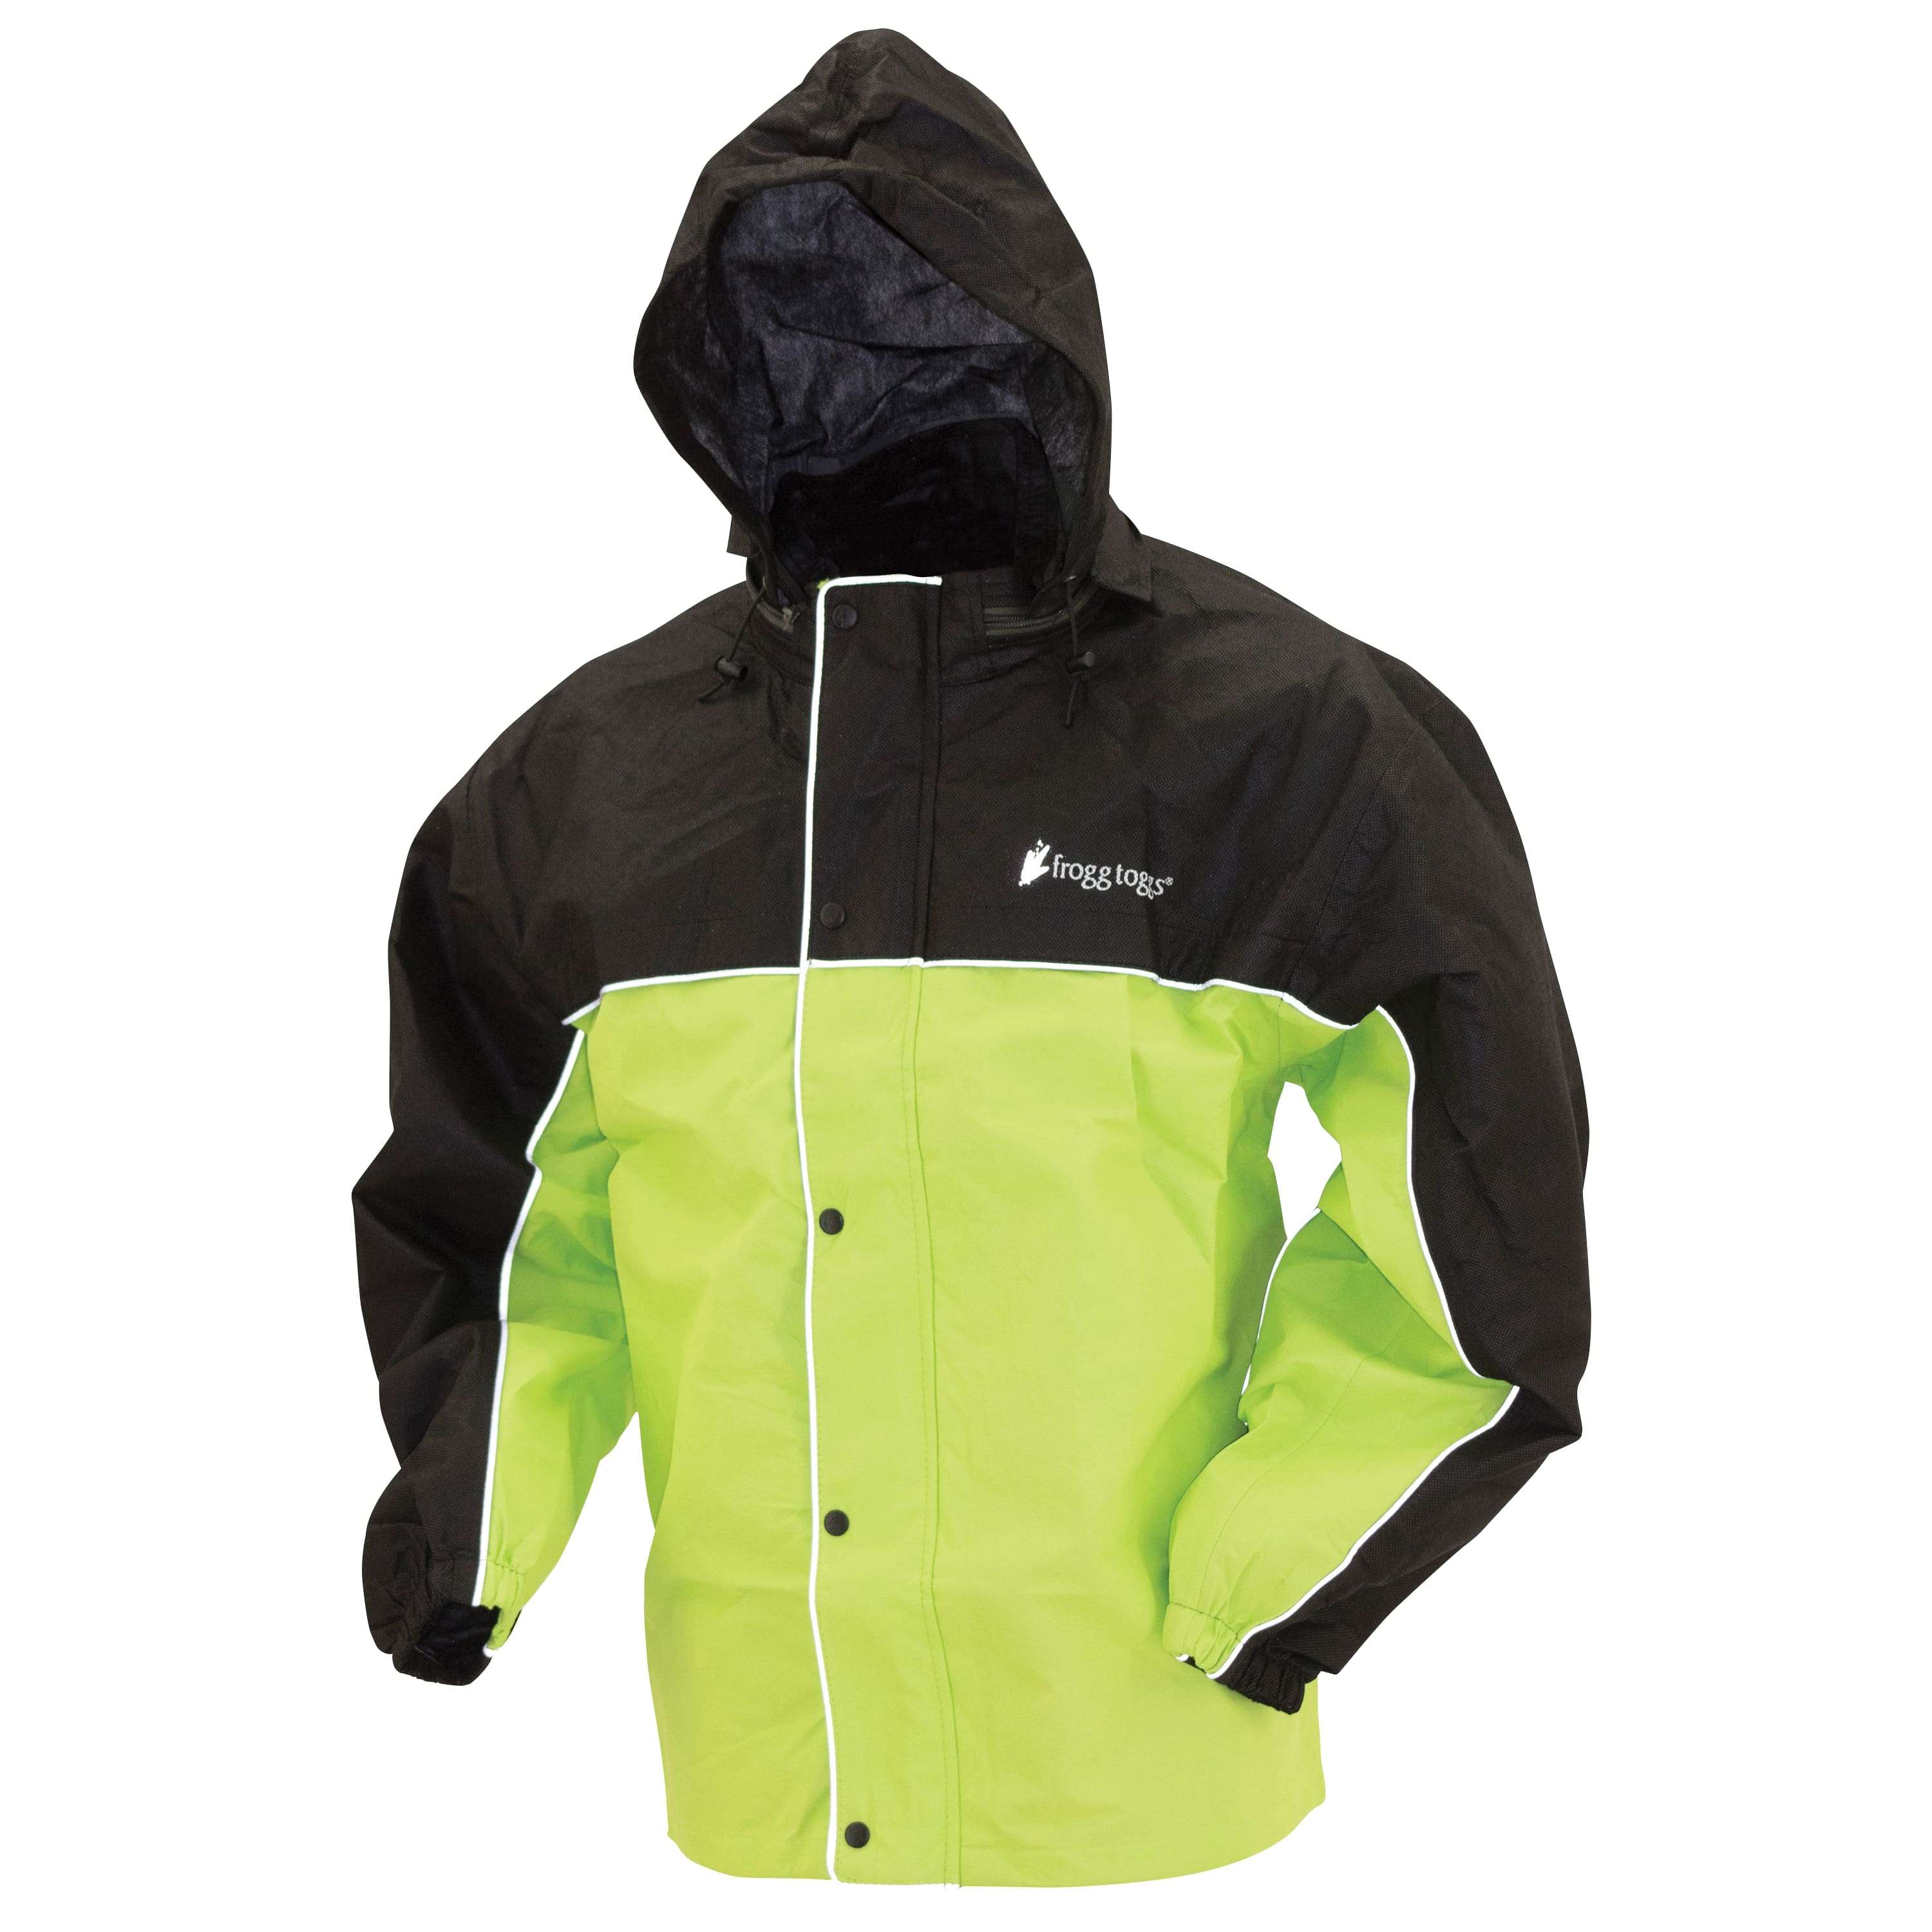 FT63132-48SM Frogg Toggs Unisex-Adult High Visibility Road Toad Rain Jacket Green, Small 